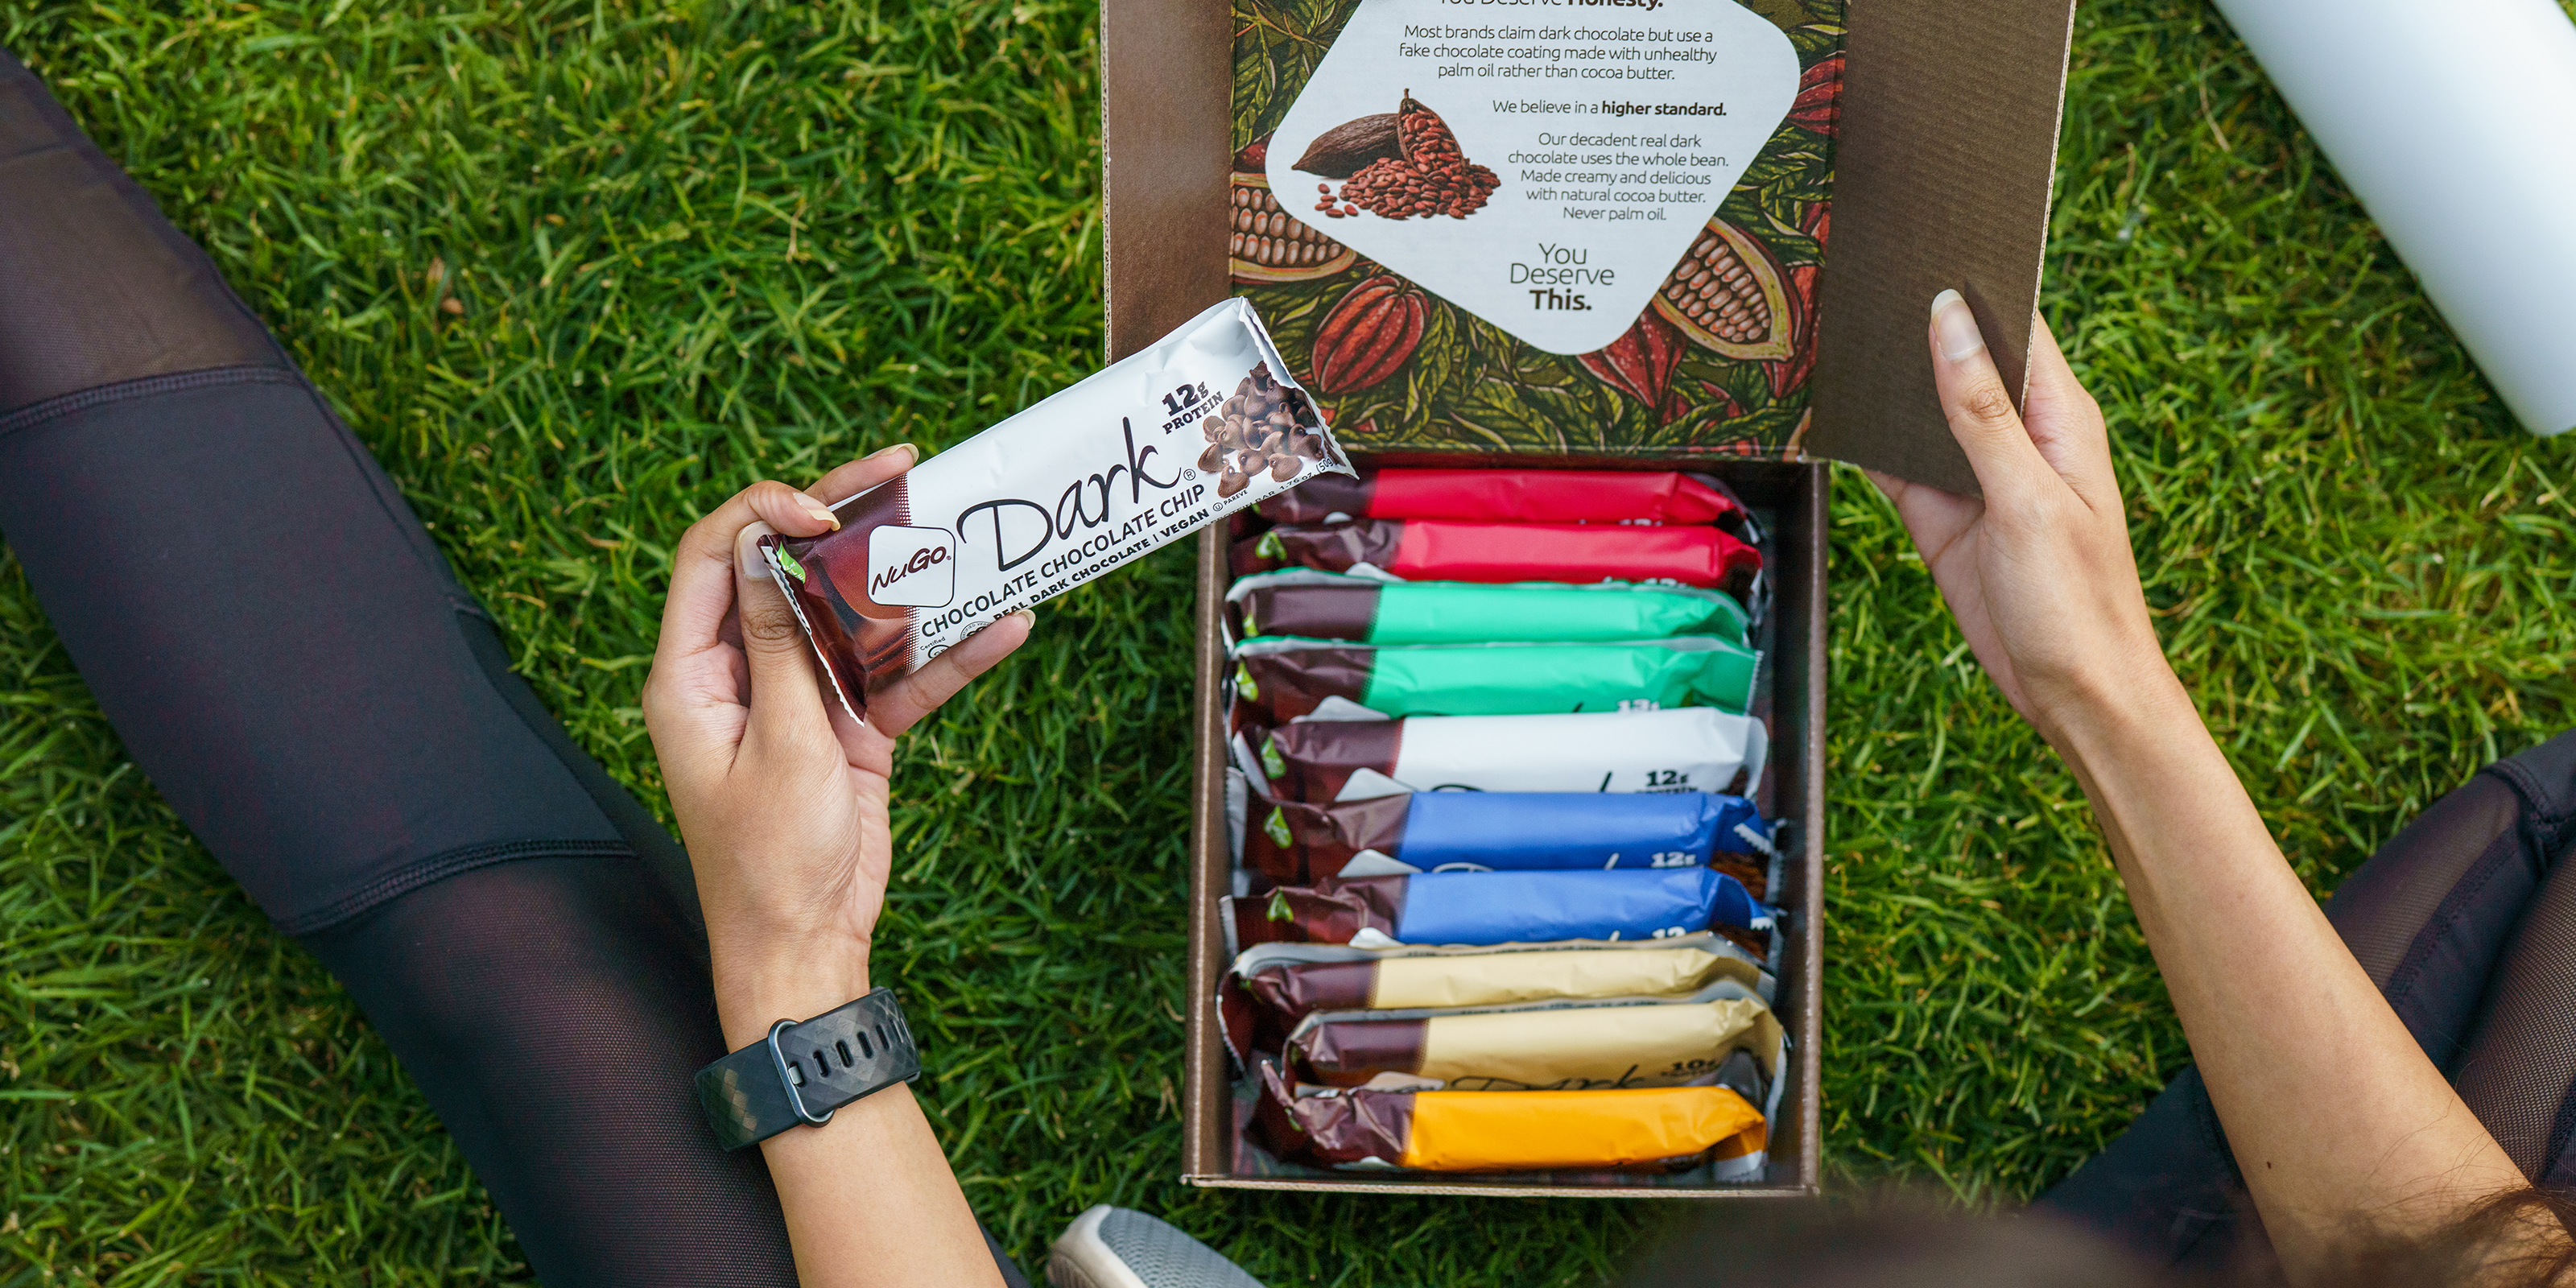 Woman sitting in grass with NuGo Dark Variety Pack box open and NuGo Dark Chocolate Chocollate Chip in hand